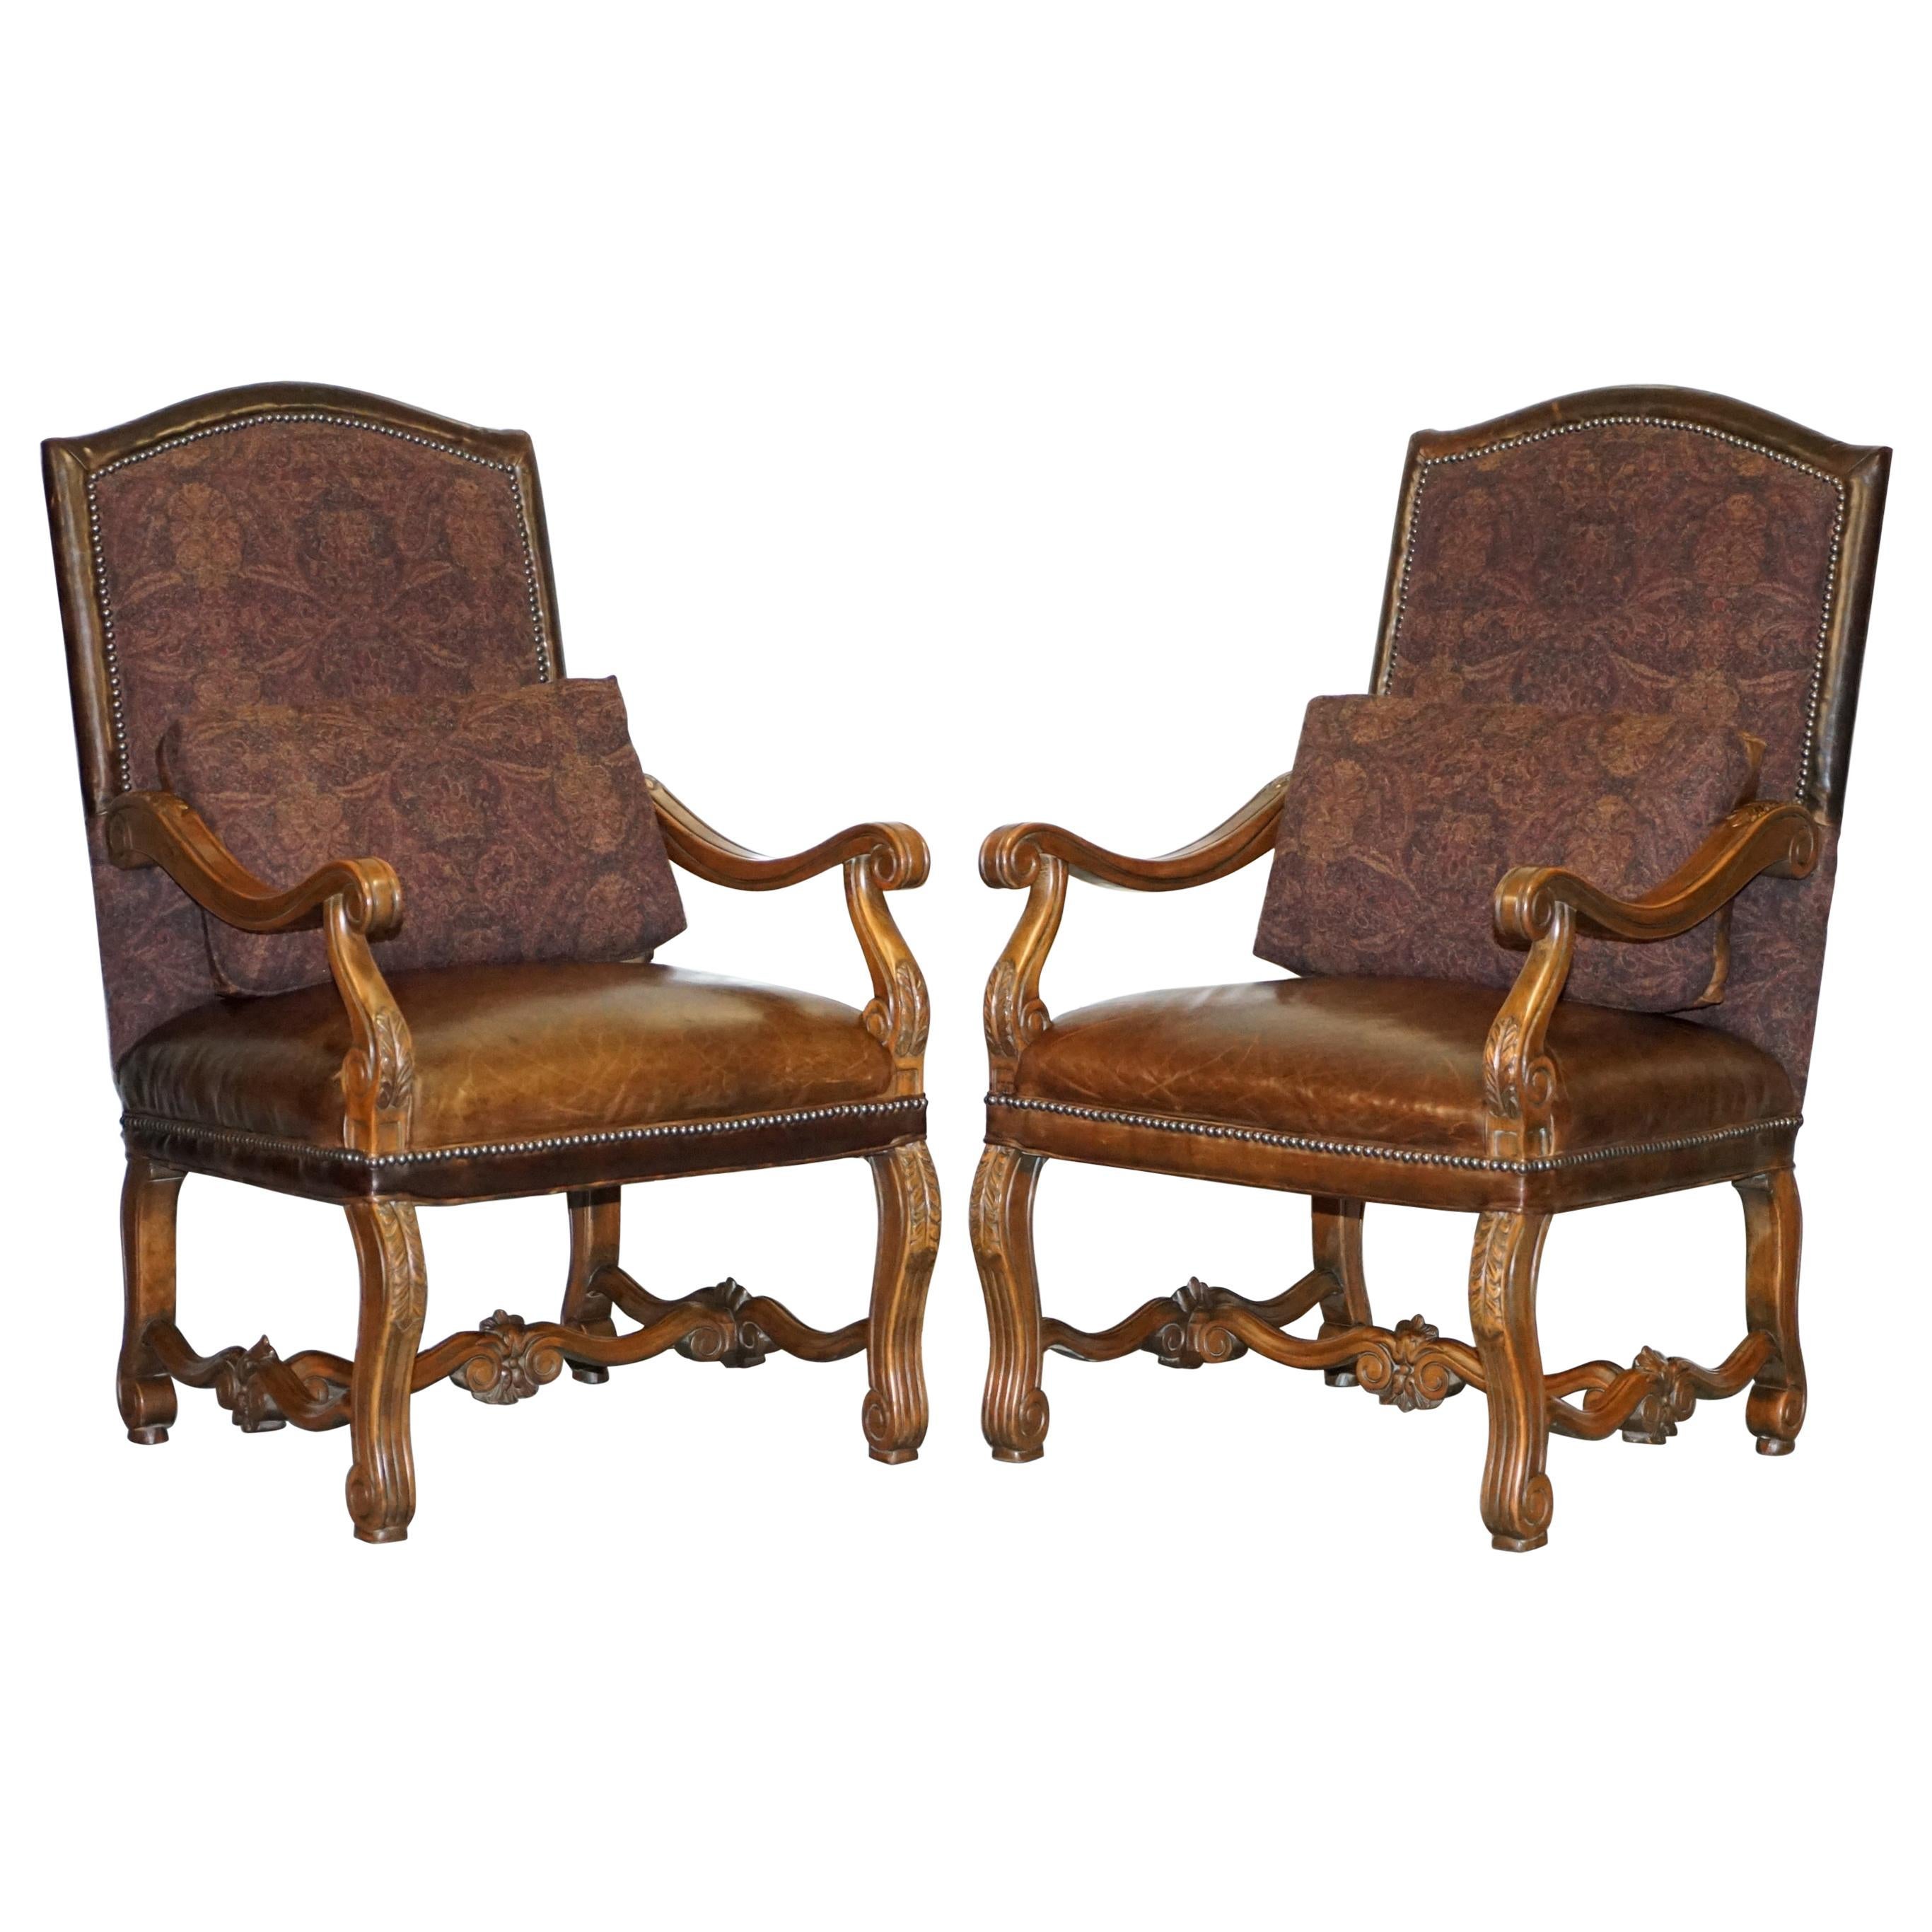 Pair of Ralph Lauren Edmund Brown Leather & Fabric Upholstered Throne Armchairs